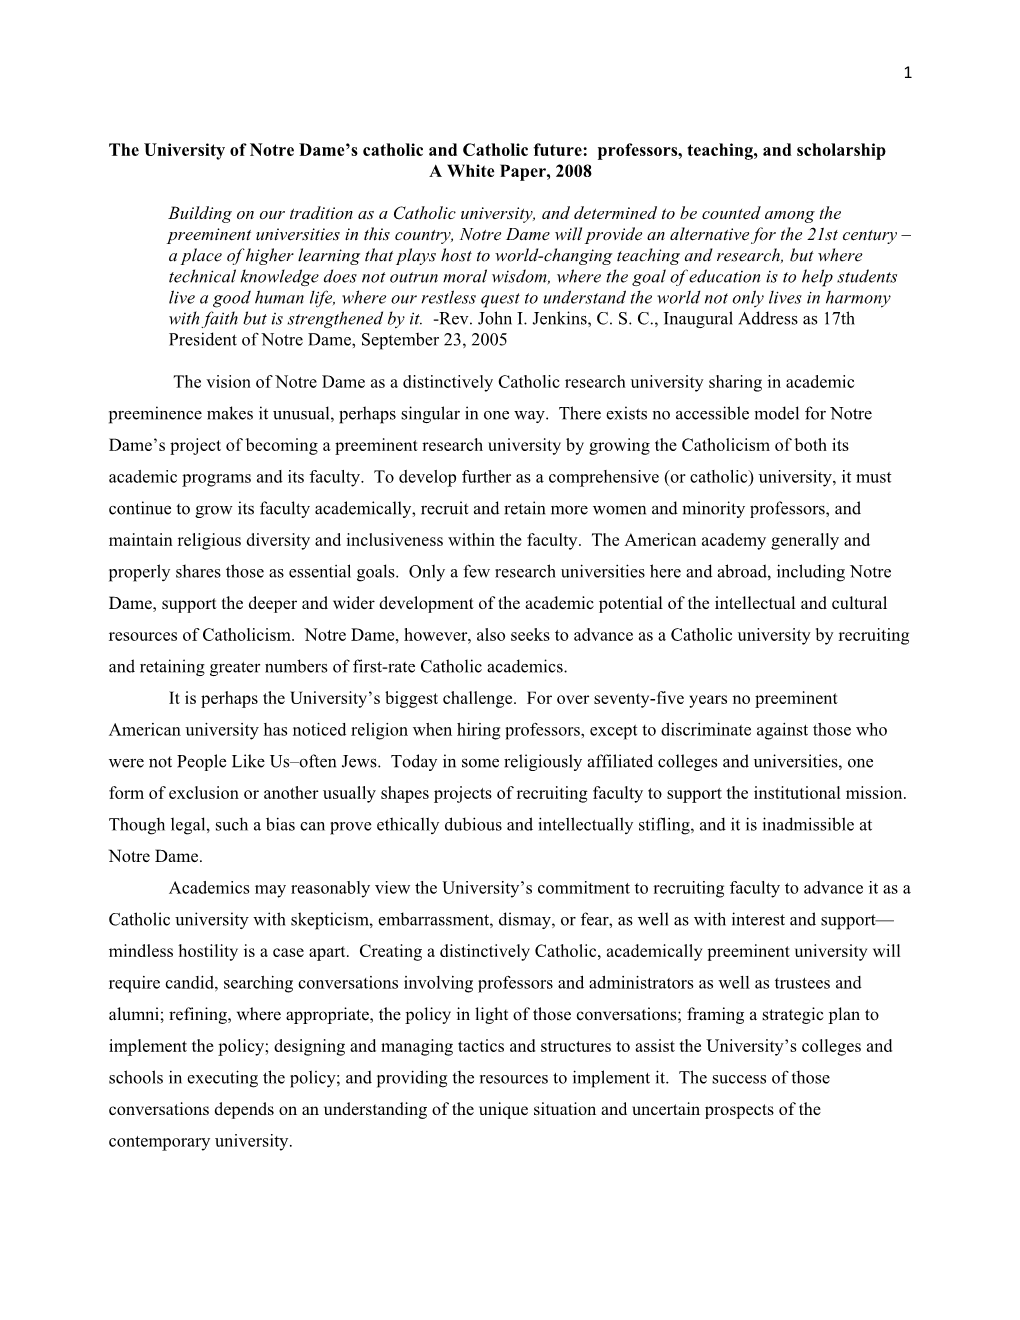 Professors, Teaching, and Scholarship a White Paper, 2008